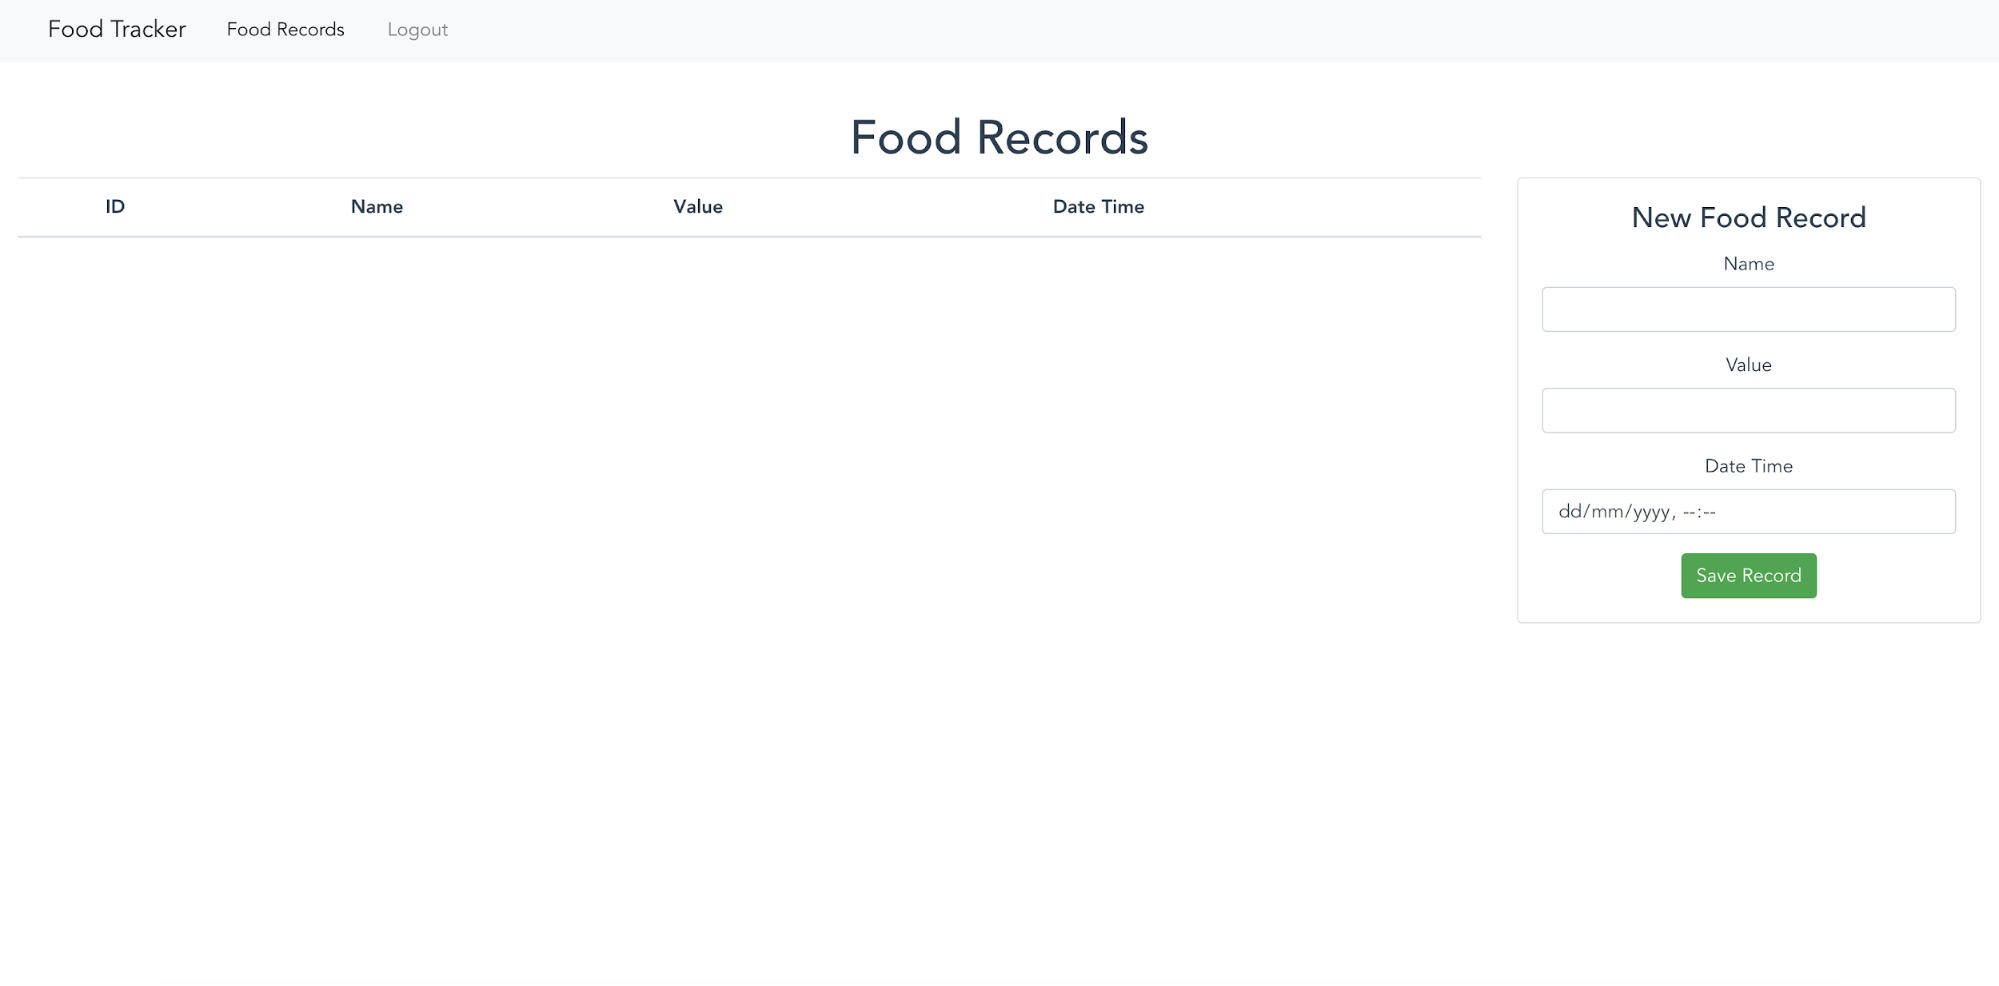 Food Tracker food records page